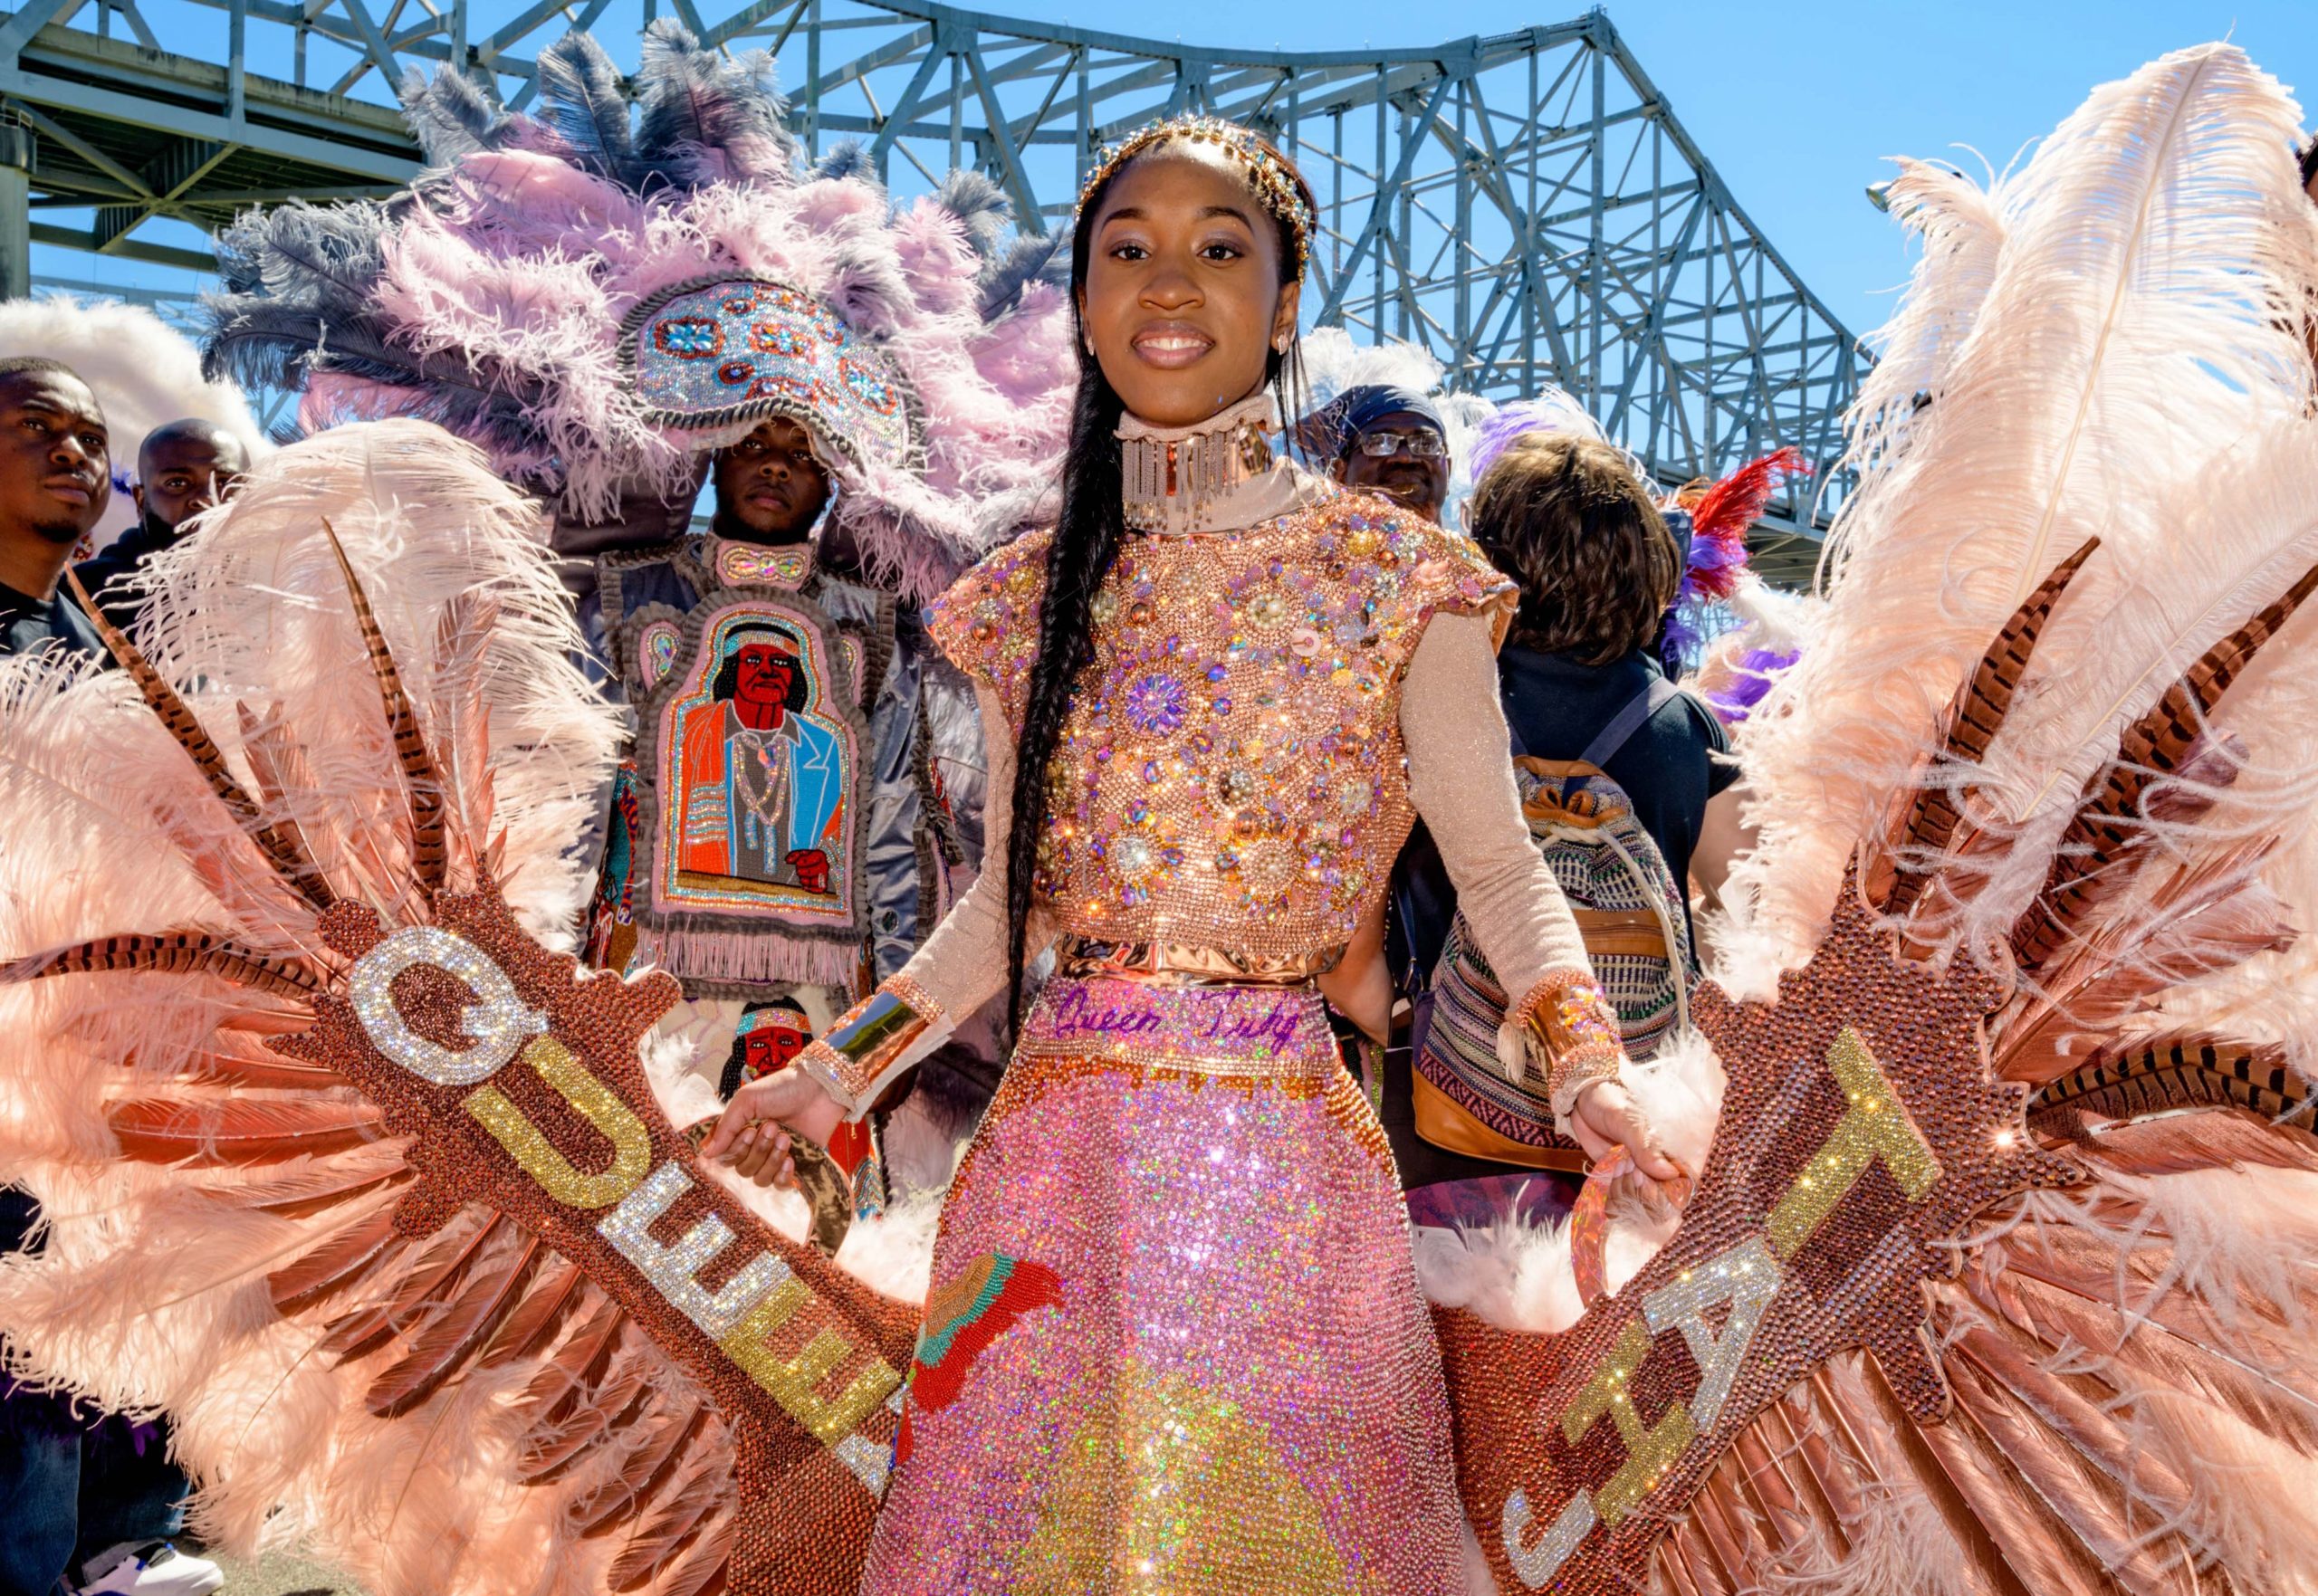 Second Queen Tahj Williams of the Golden Eagles Mardi Gras Indians stands near the Crescent City Connection Bridges that bring traffic to the West Bank during the West Bank Super Sunday in the Algiers neighborhood in New Orleans, La. Sunday, April 14, 2019. Photo by Matthew Hinton